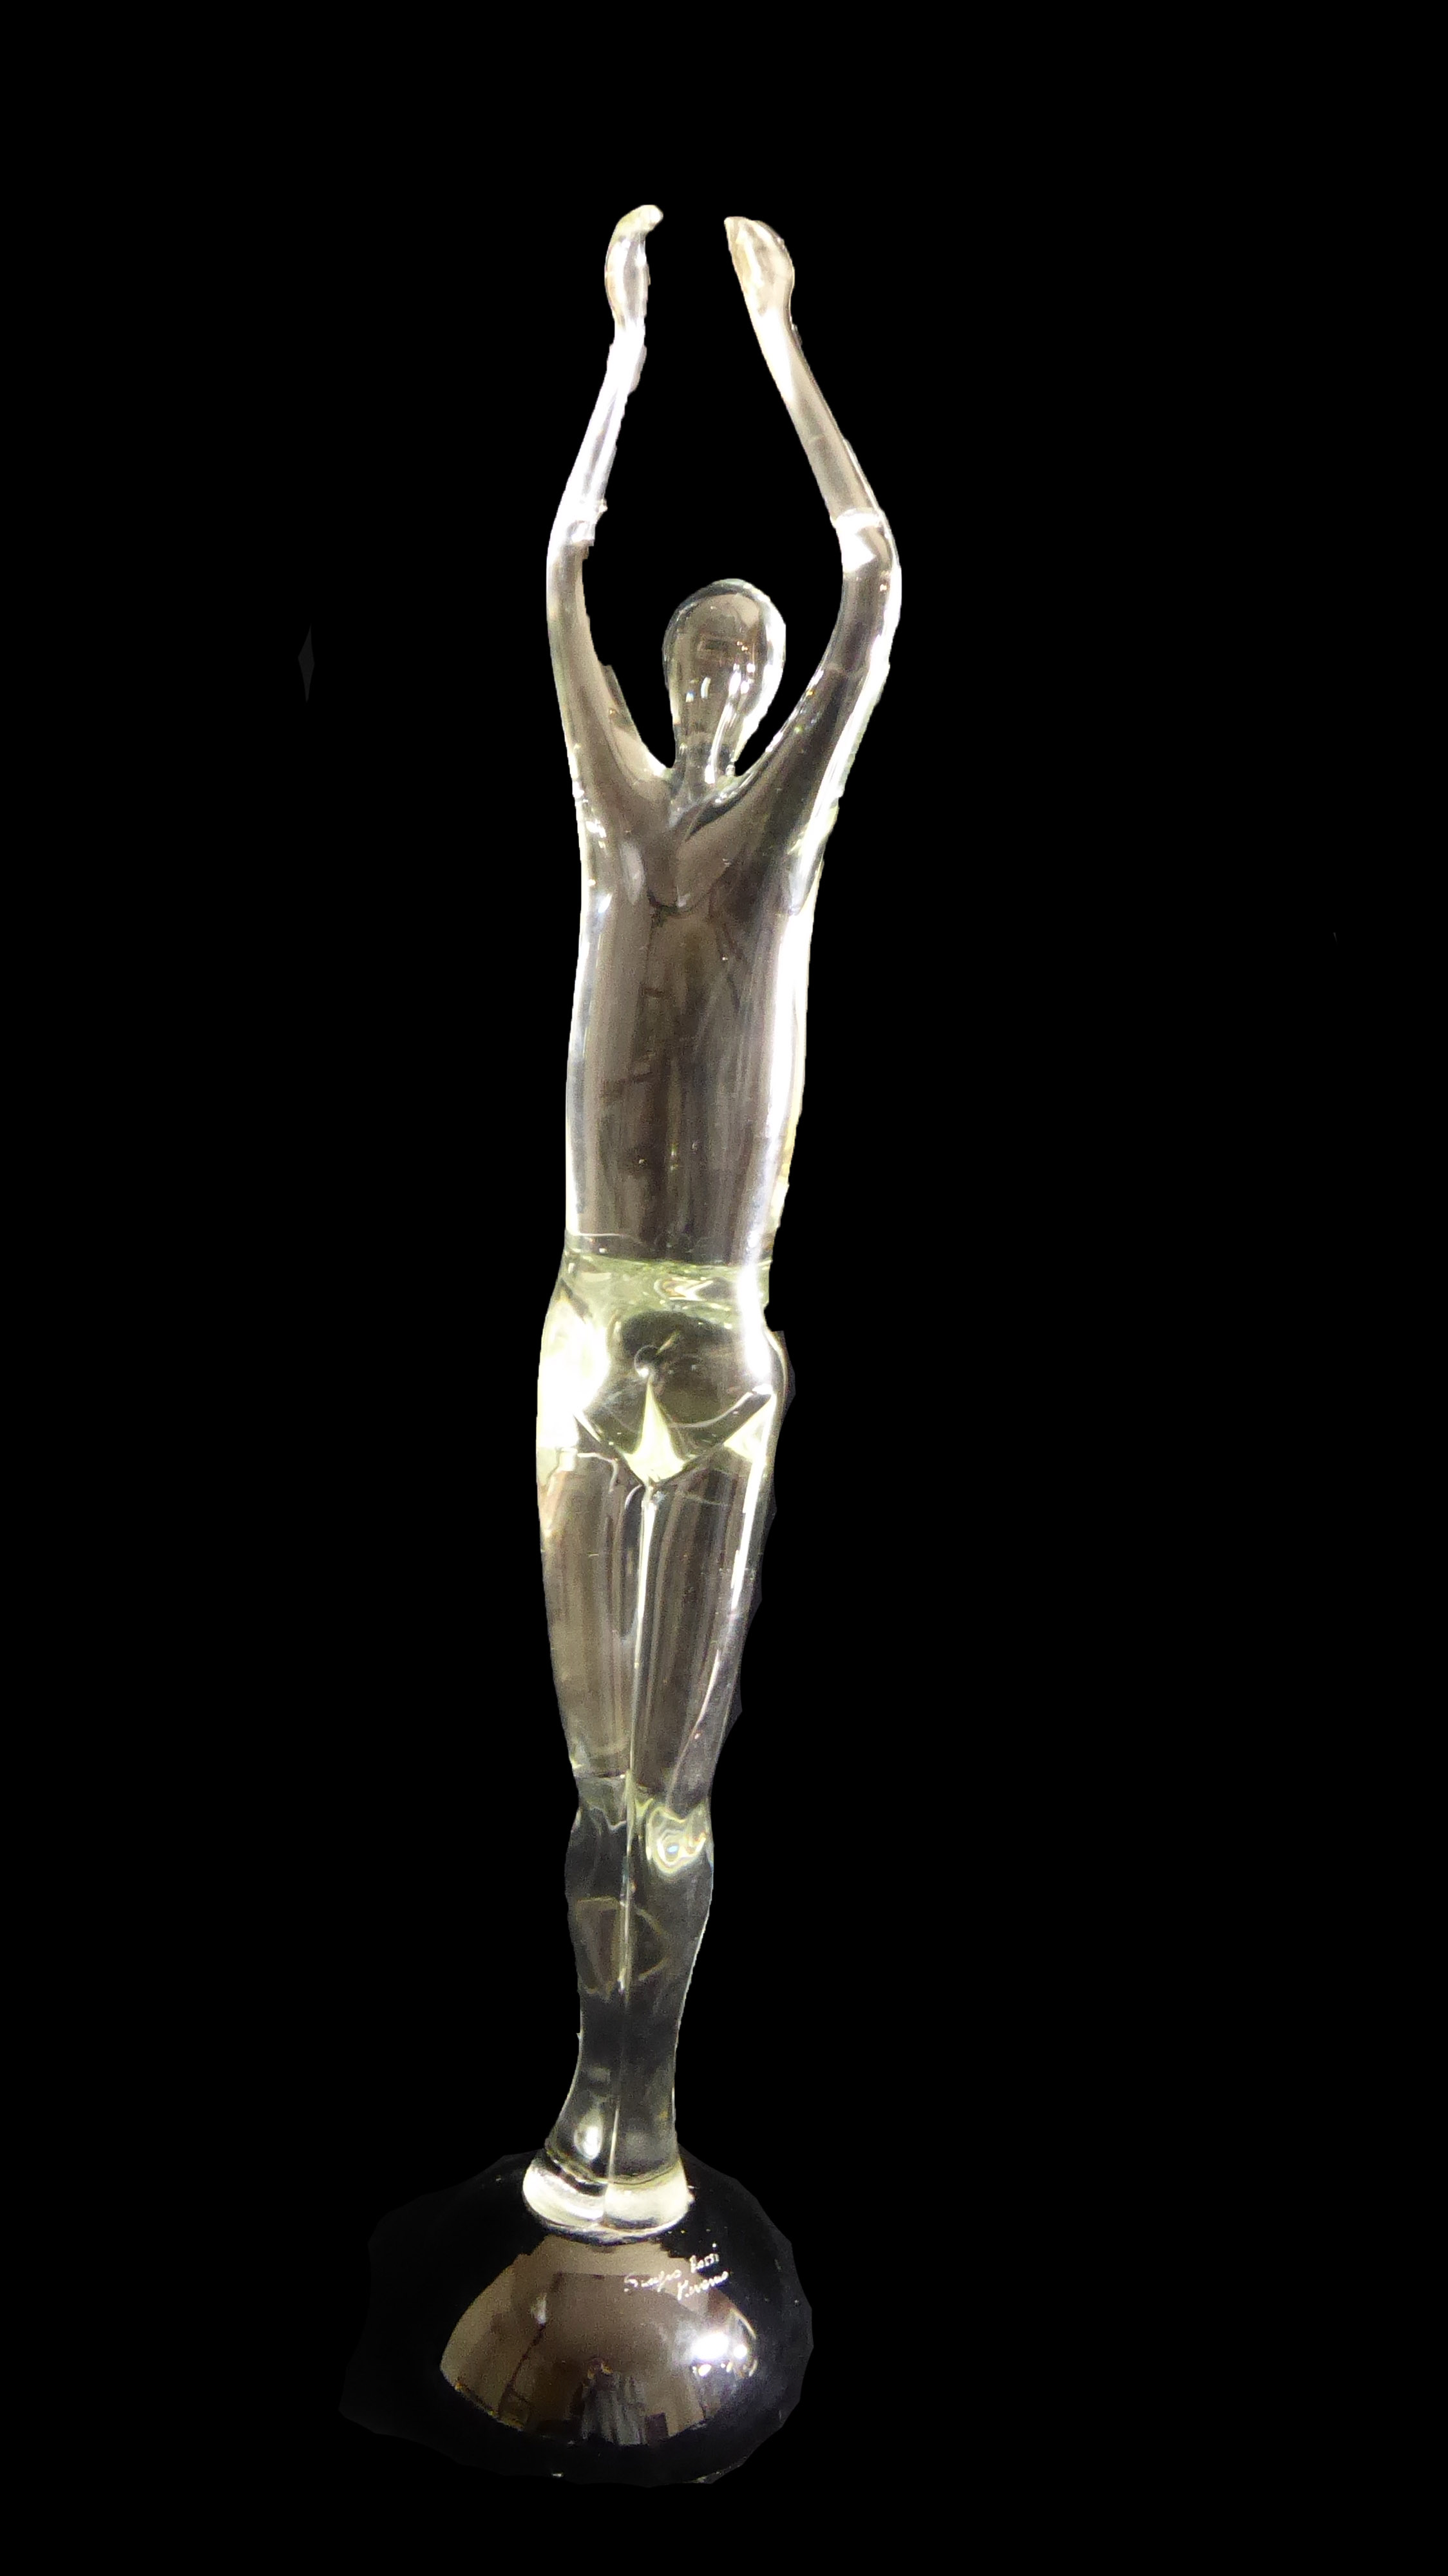 SERGIO ROSSI, A 20TH CENTURY MURANO GLASS FIGURAL SCULPTURE OF AN ELONGATED MALE FORM Raised on a